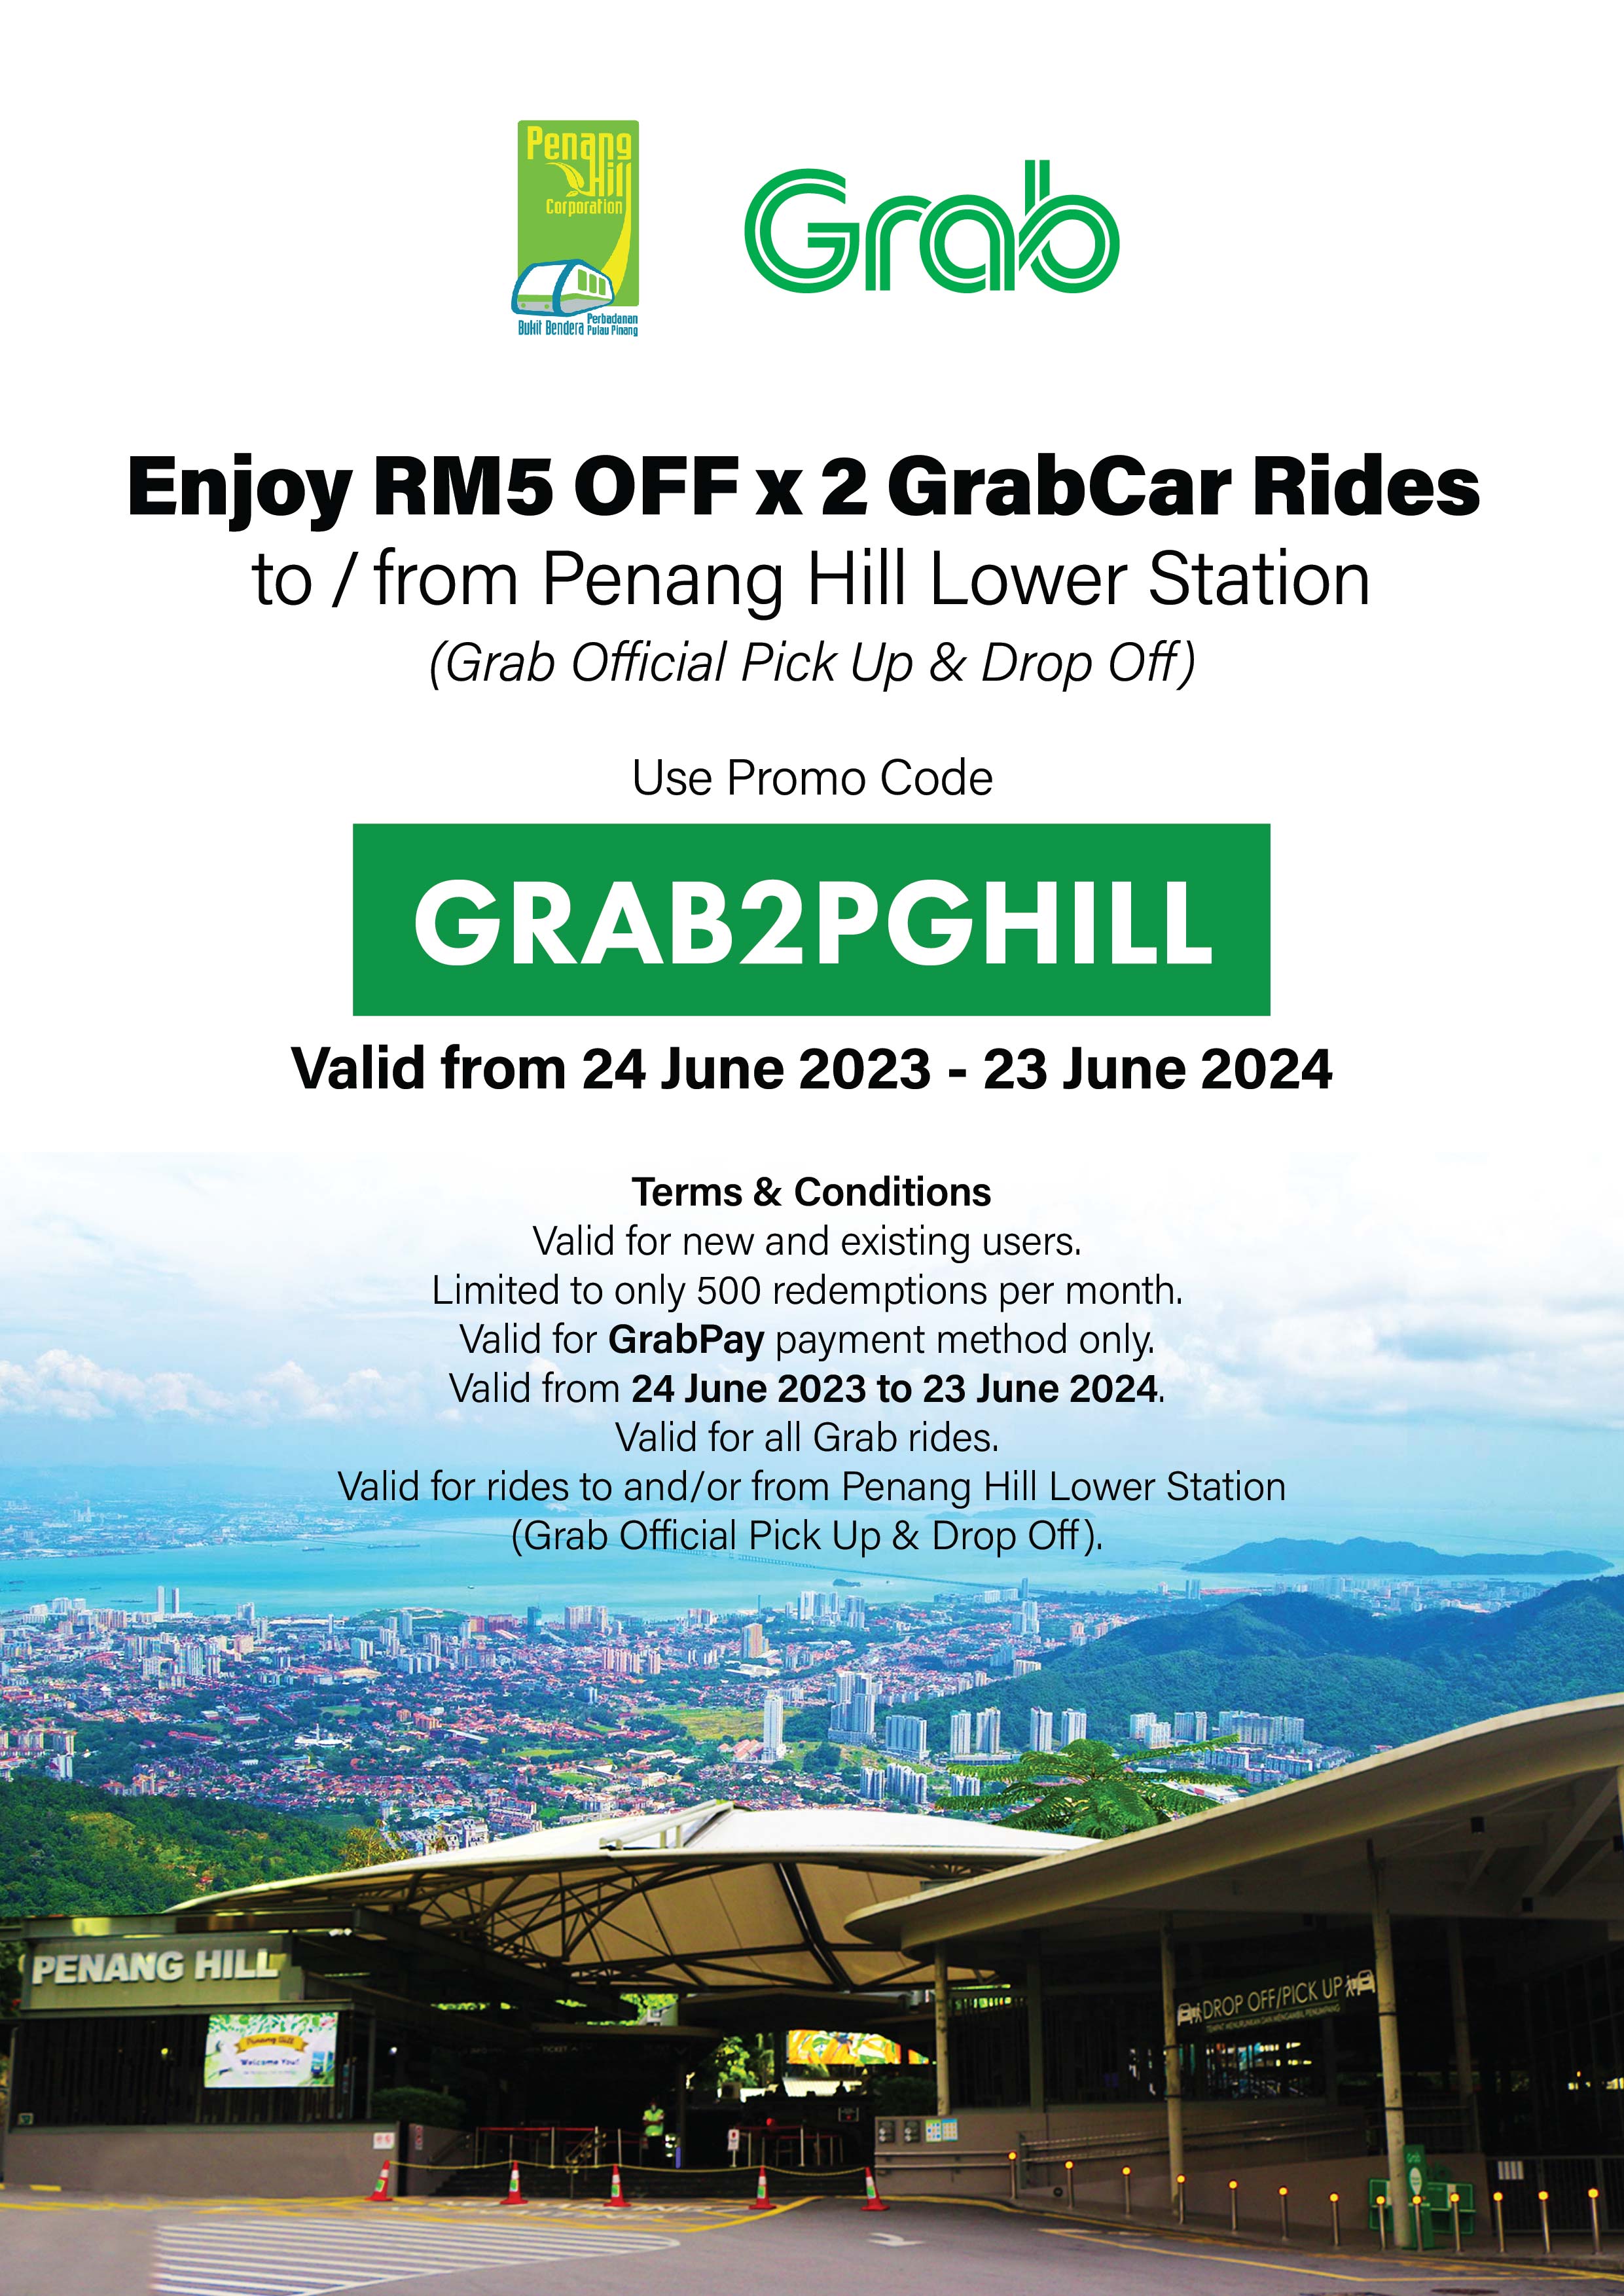 Enjoy RM5 OFF x 2 GrabCar Rides to / from Penang Hill Lower Station